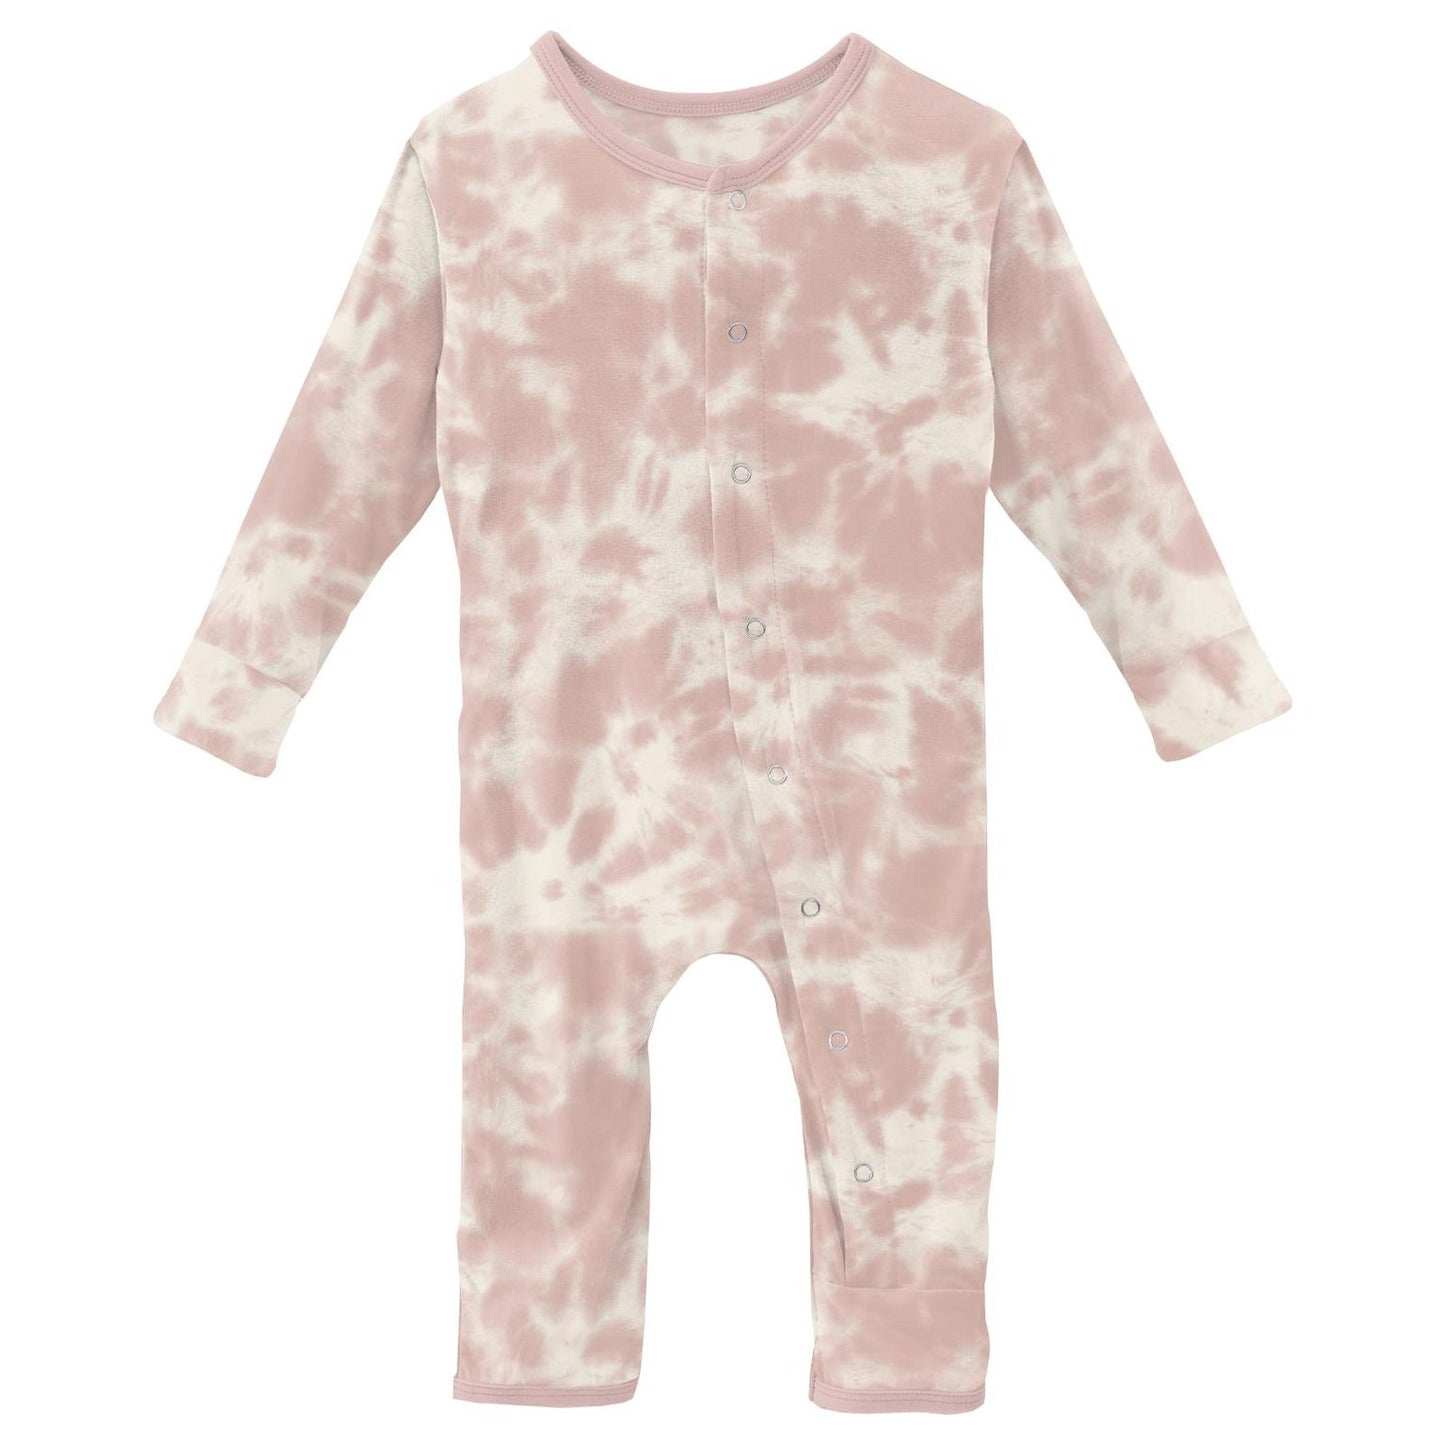 Coverall (Snaps/Zipper) - Baby Rose Tie Dye